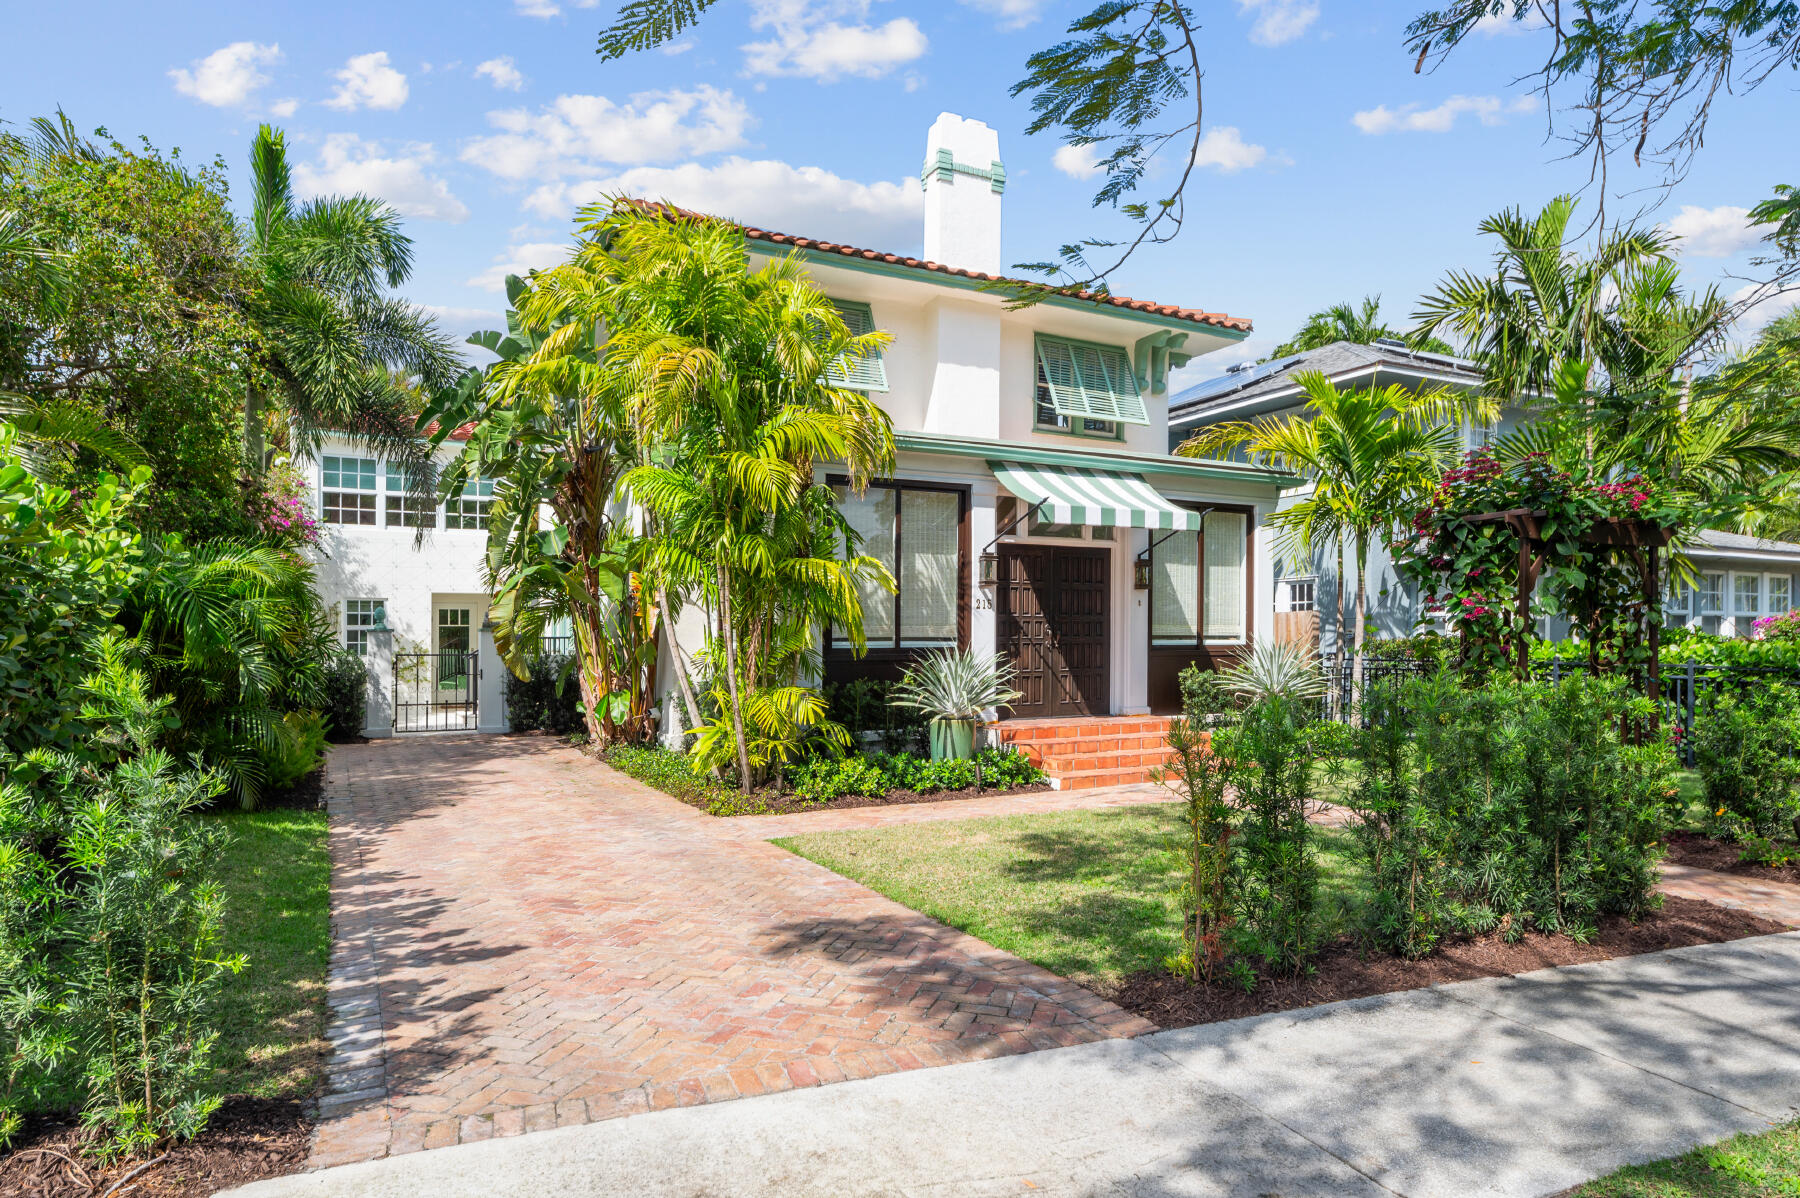 215 Westminster Road, West Palm Beach, Palm Beach County, Florida - 4 Bedrooms  
3.5 Bathrooms - 